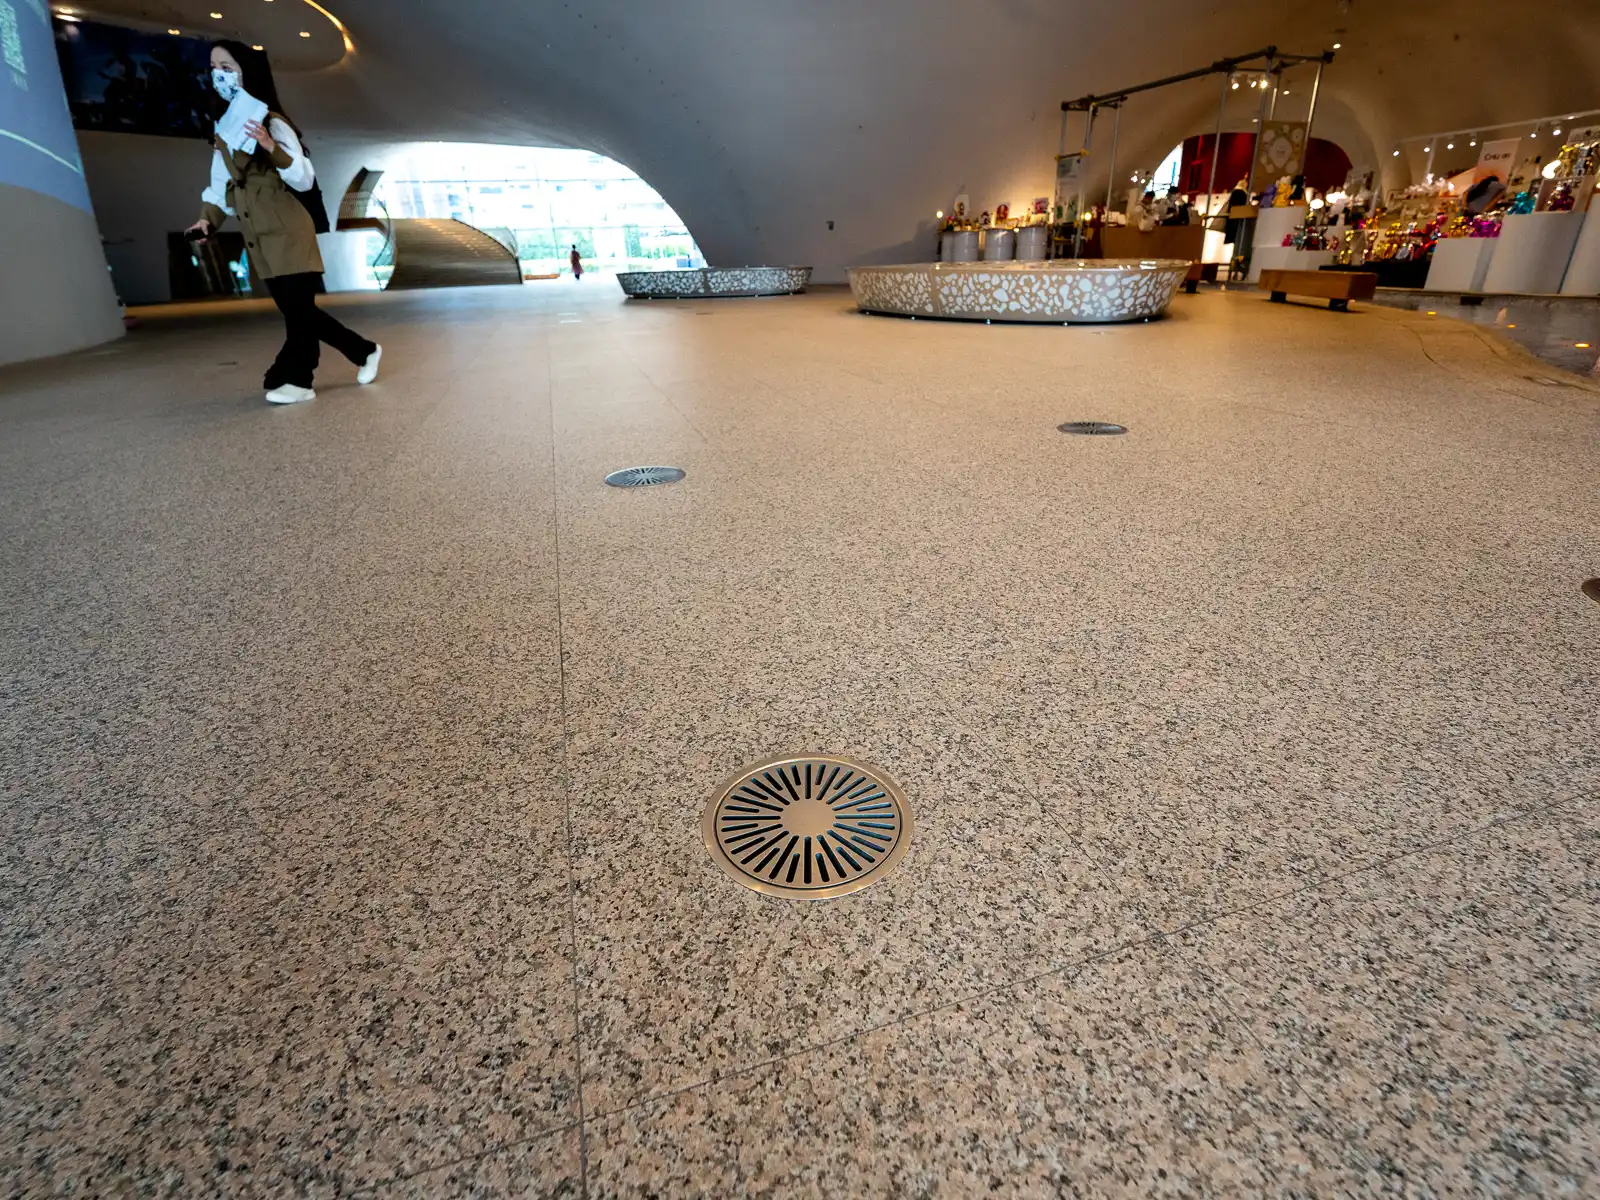 Small circular floor vents can be seen on the first floor of the National Taichung Theater.